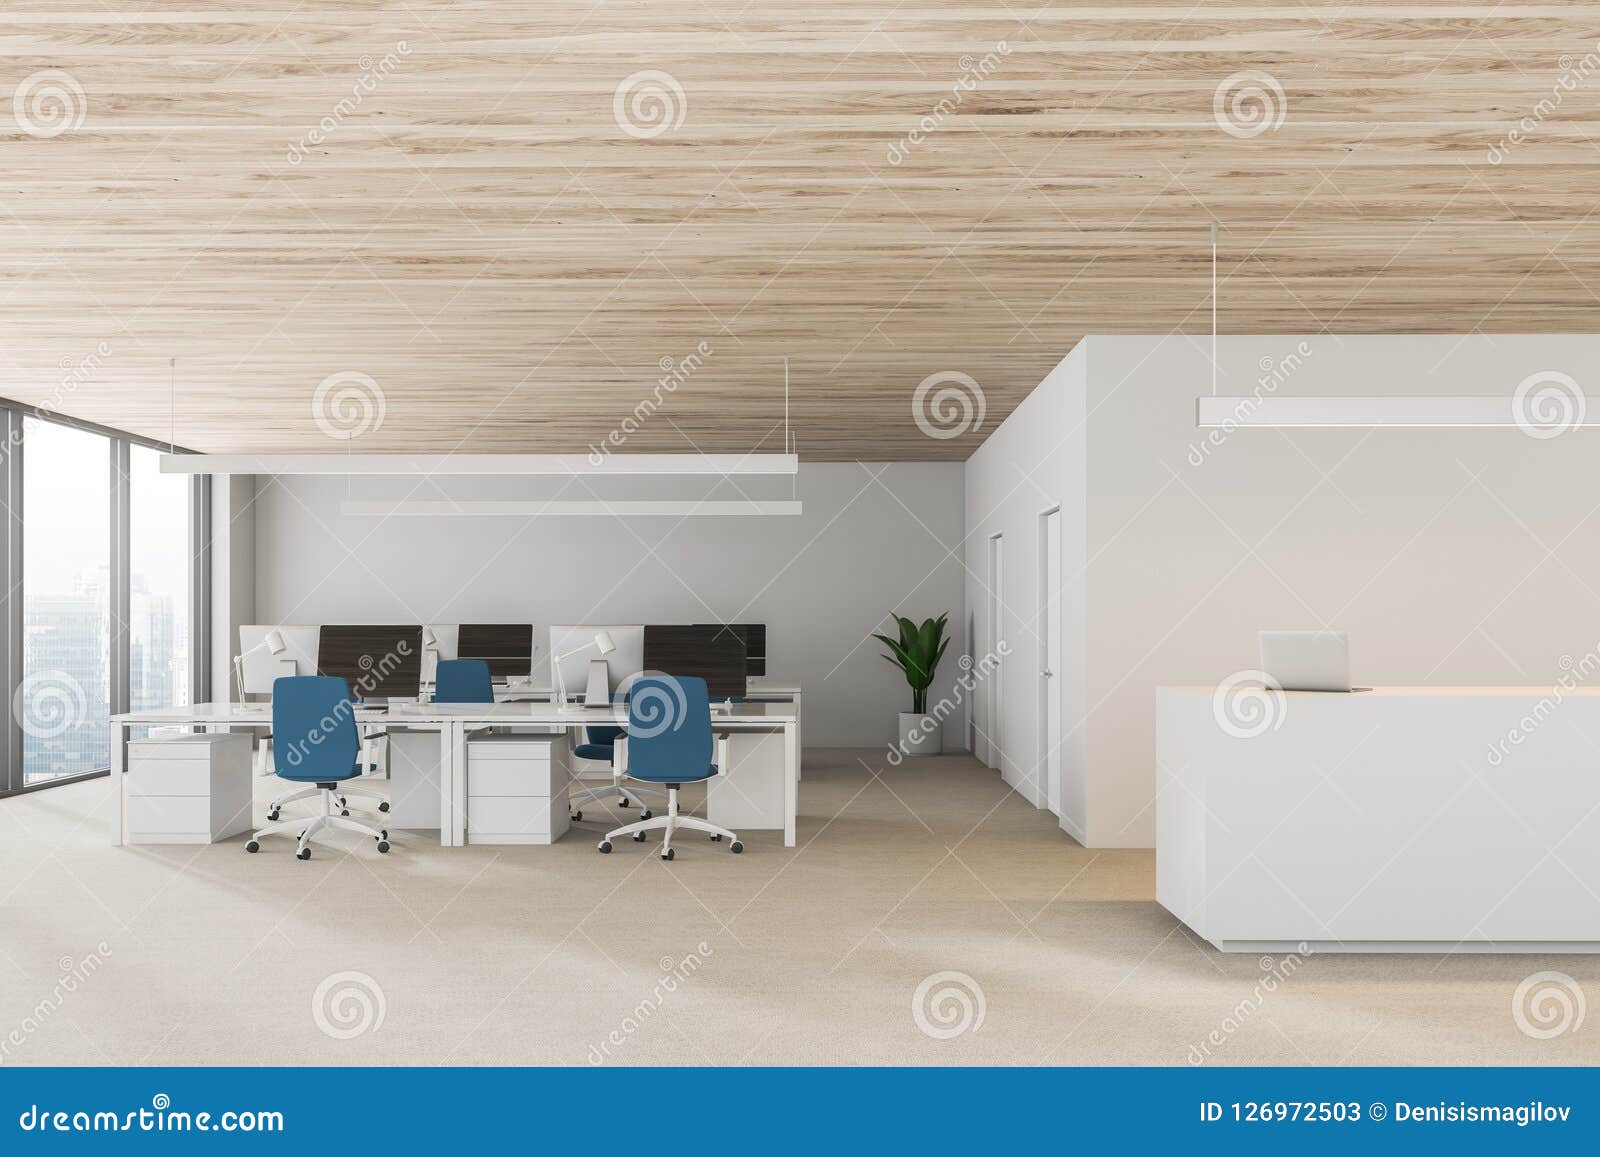 Wood Ceiling Open Space Office Interior Reception Stock